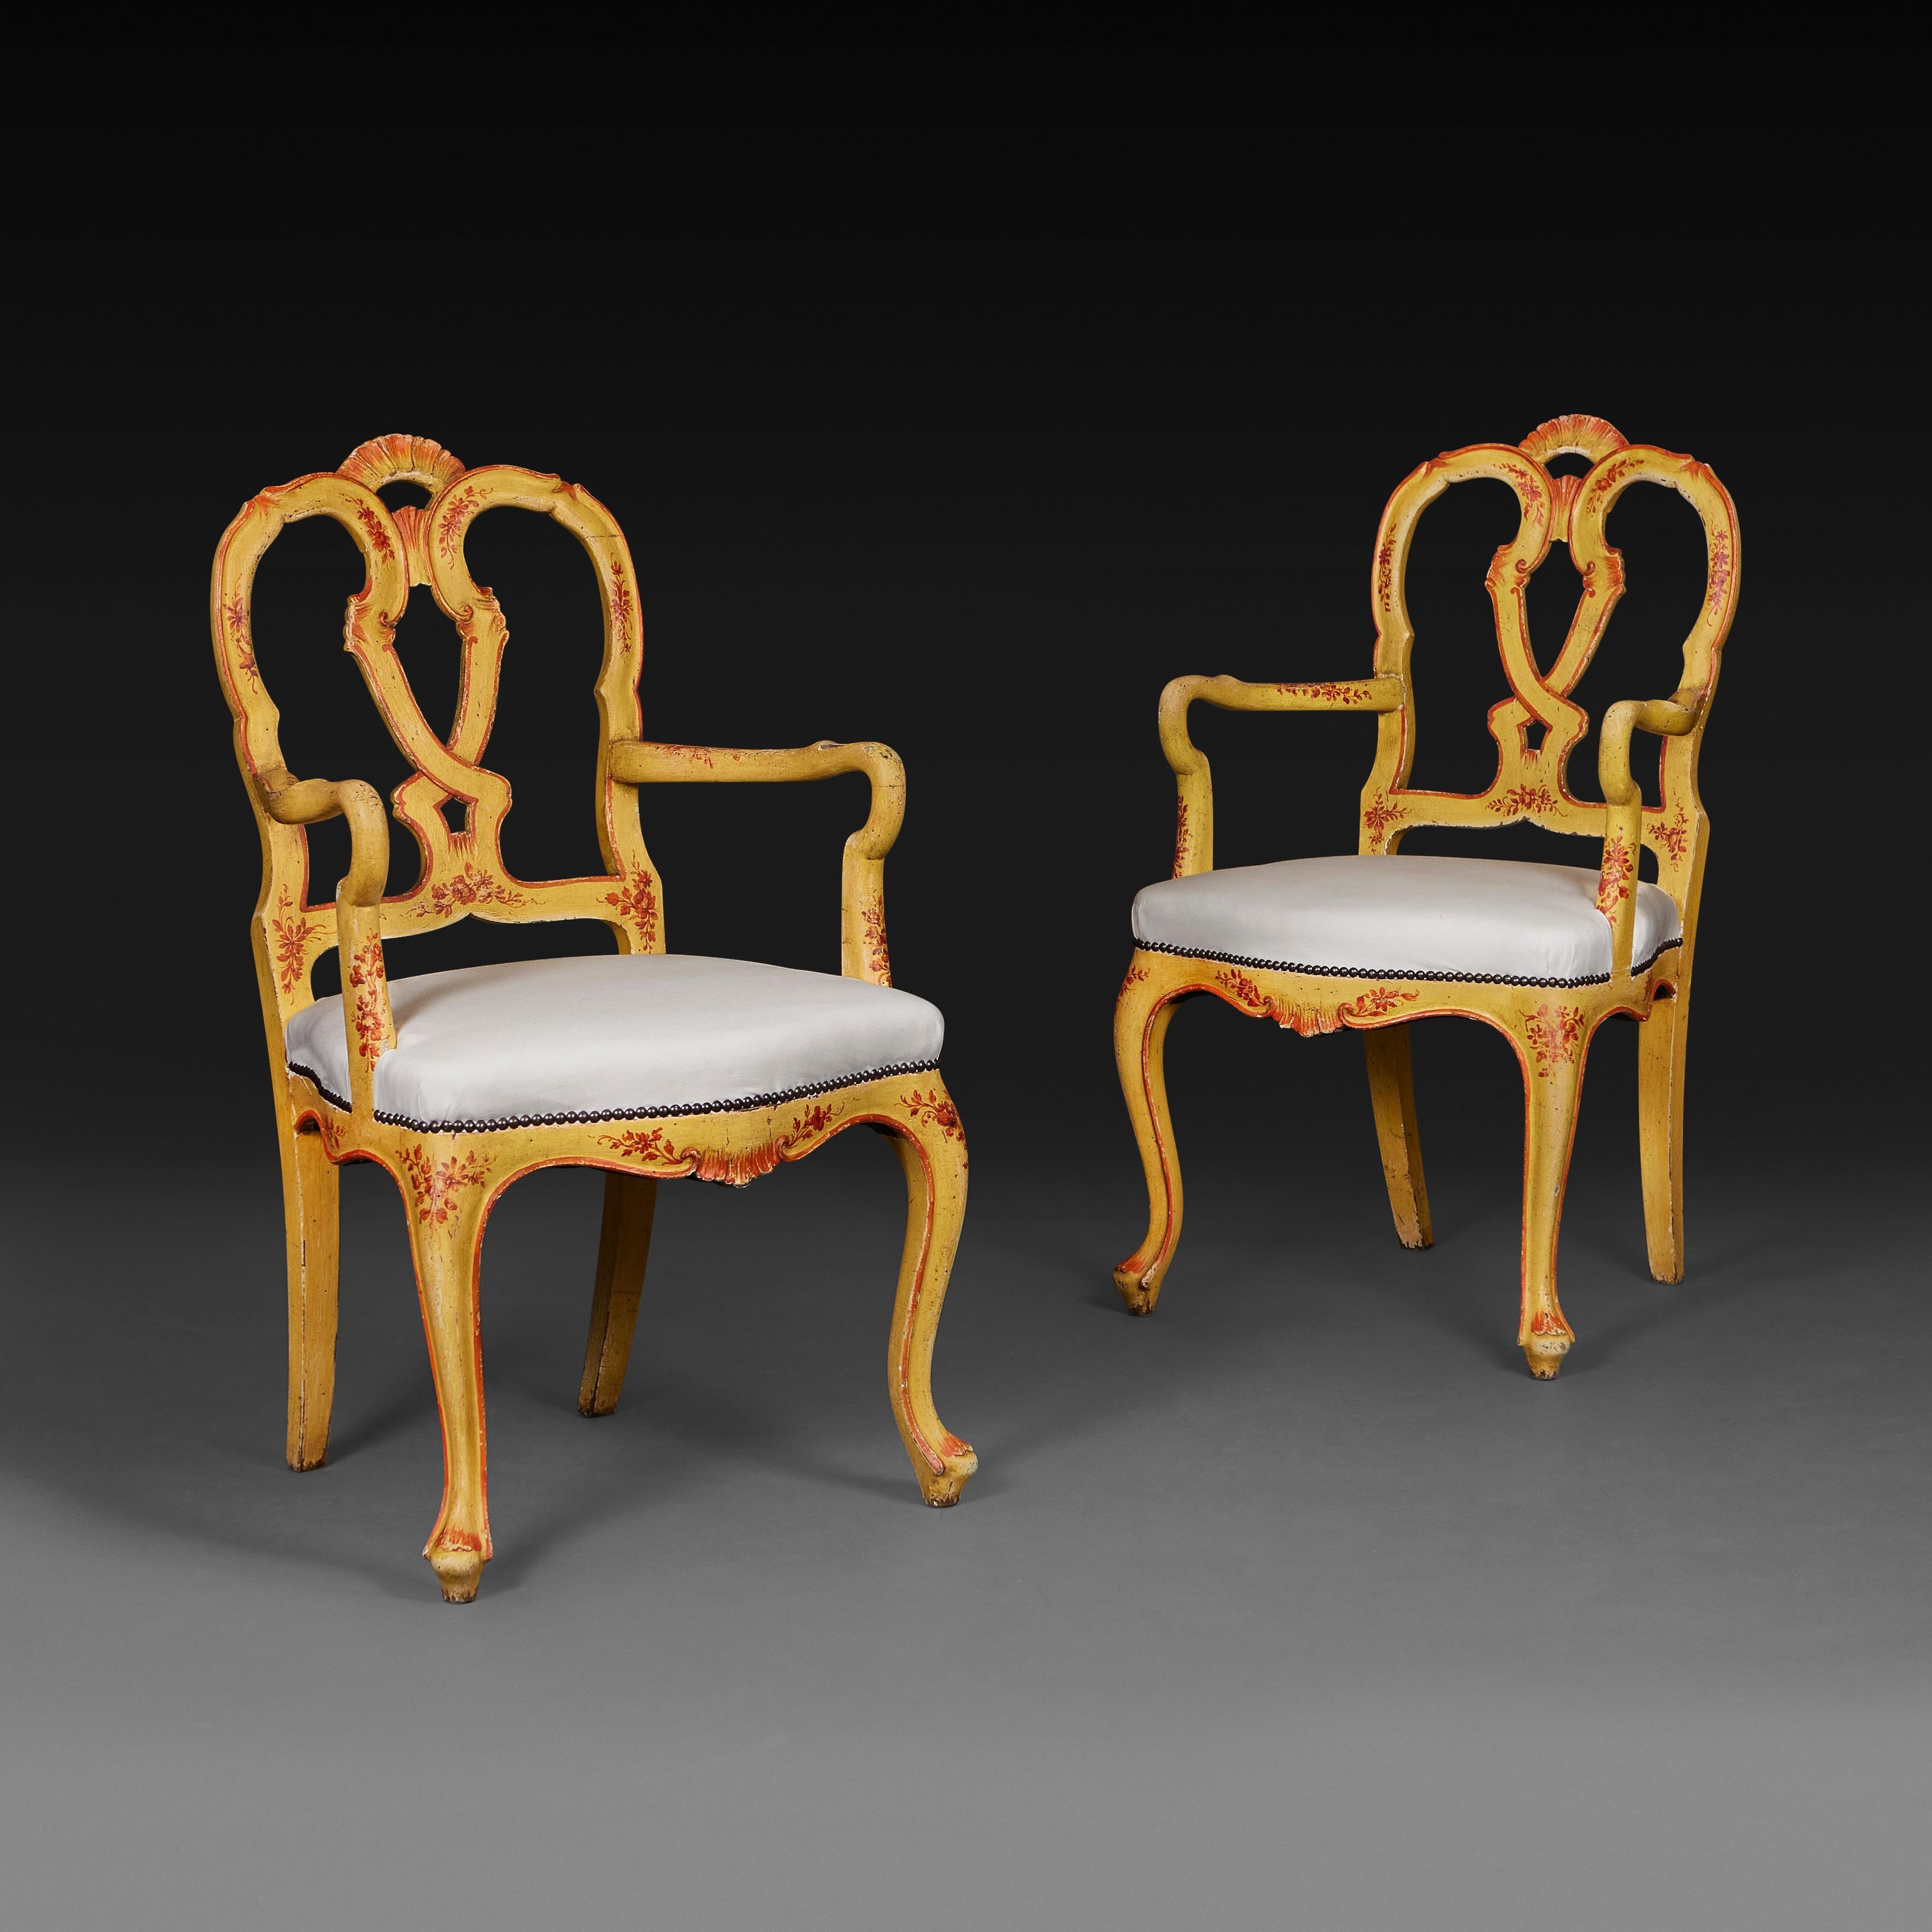 Italy, circa 1880

An unusual pair of late nineteenth century Venetian armchairs, the frames painted with yellow surface throughout, with red detailing, the back splat with intertwined knot to the centre and carved fan motif to the top. Now